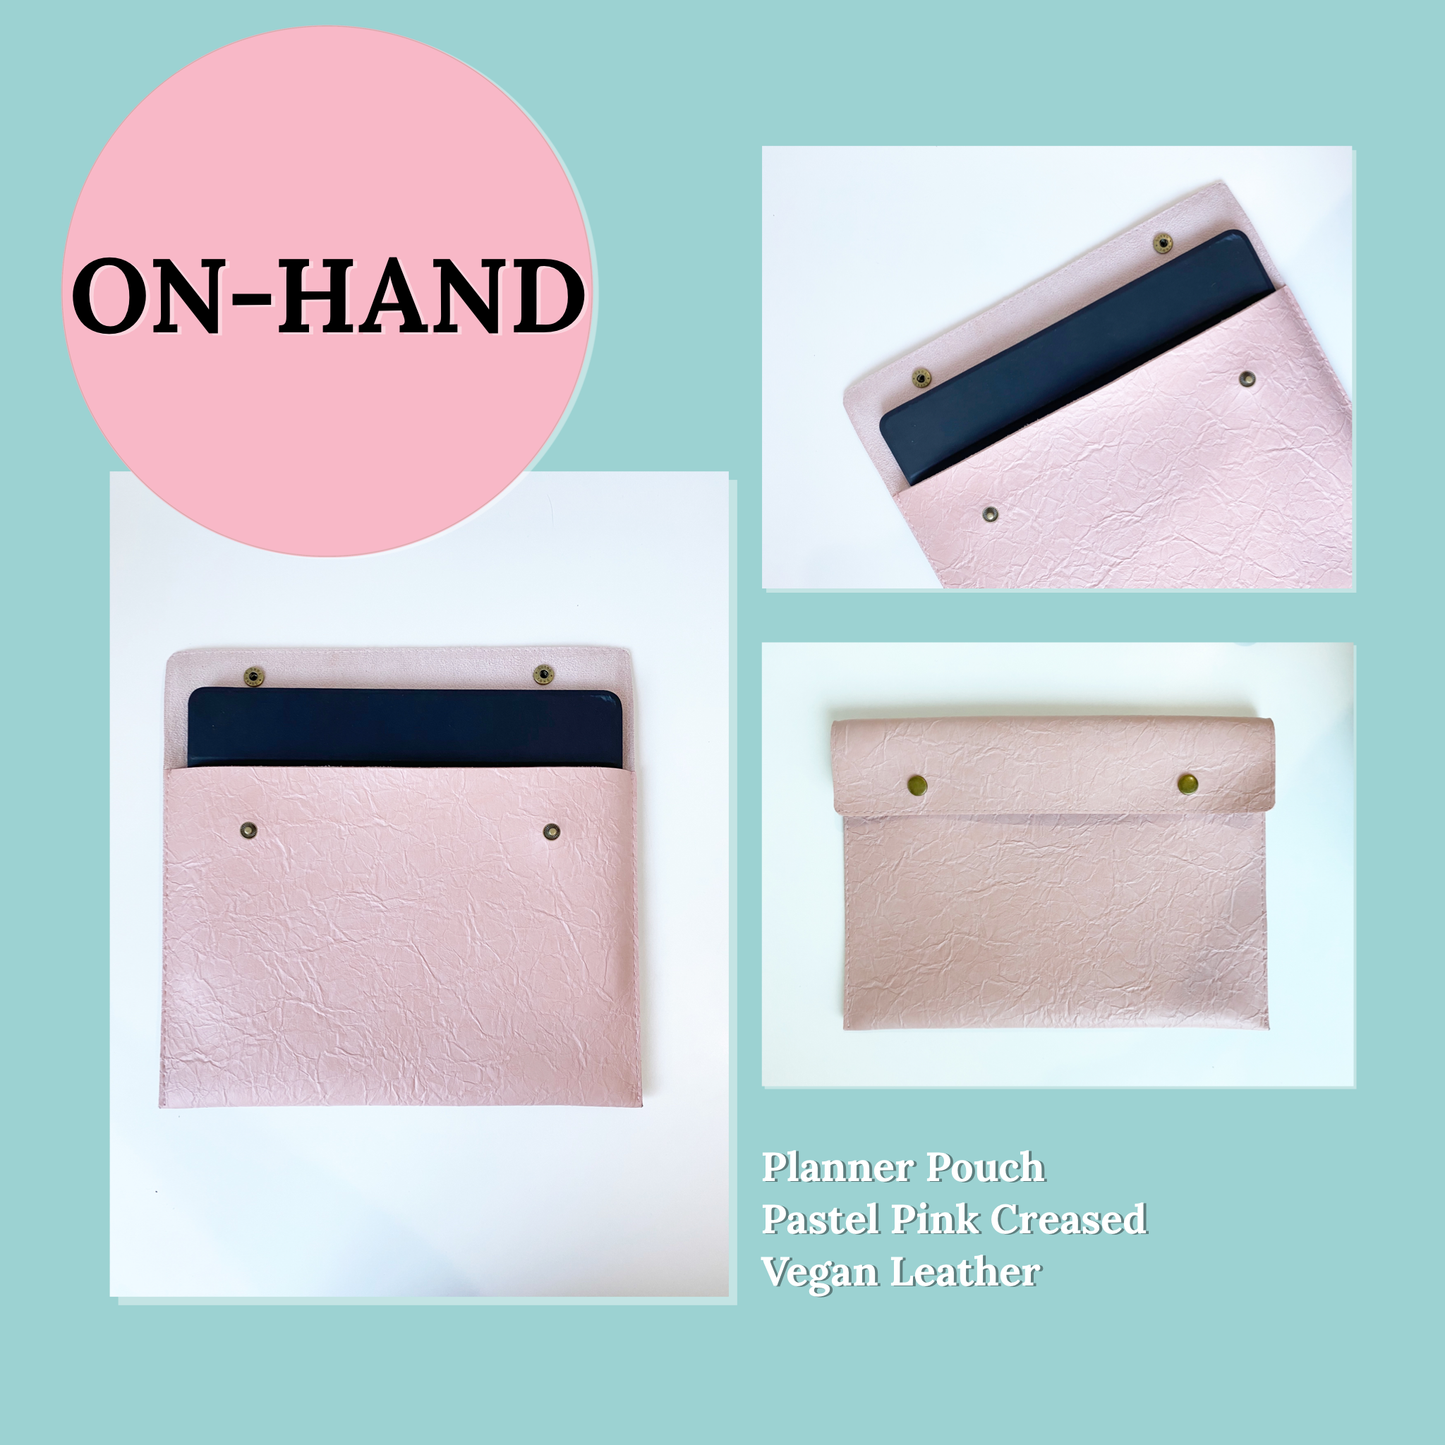 Planner Pouch in Pastel Pink